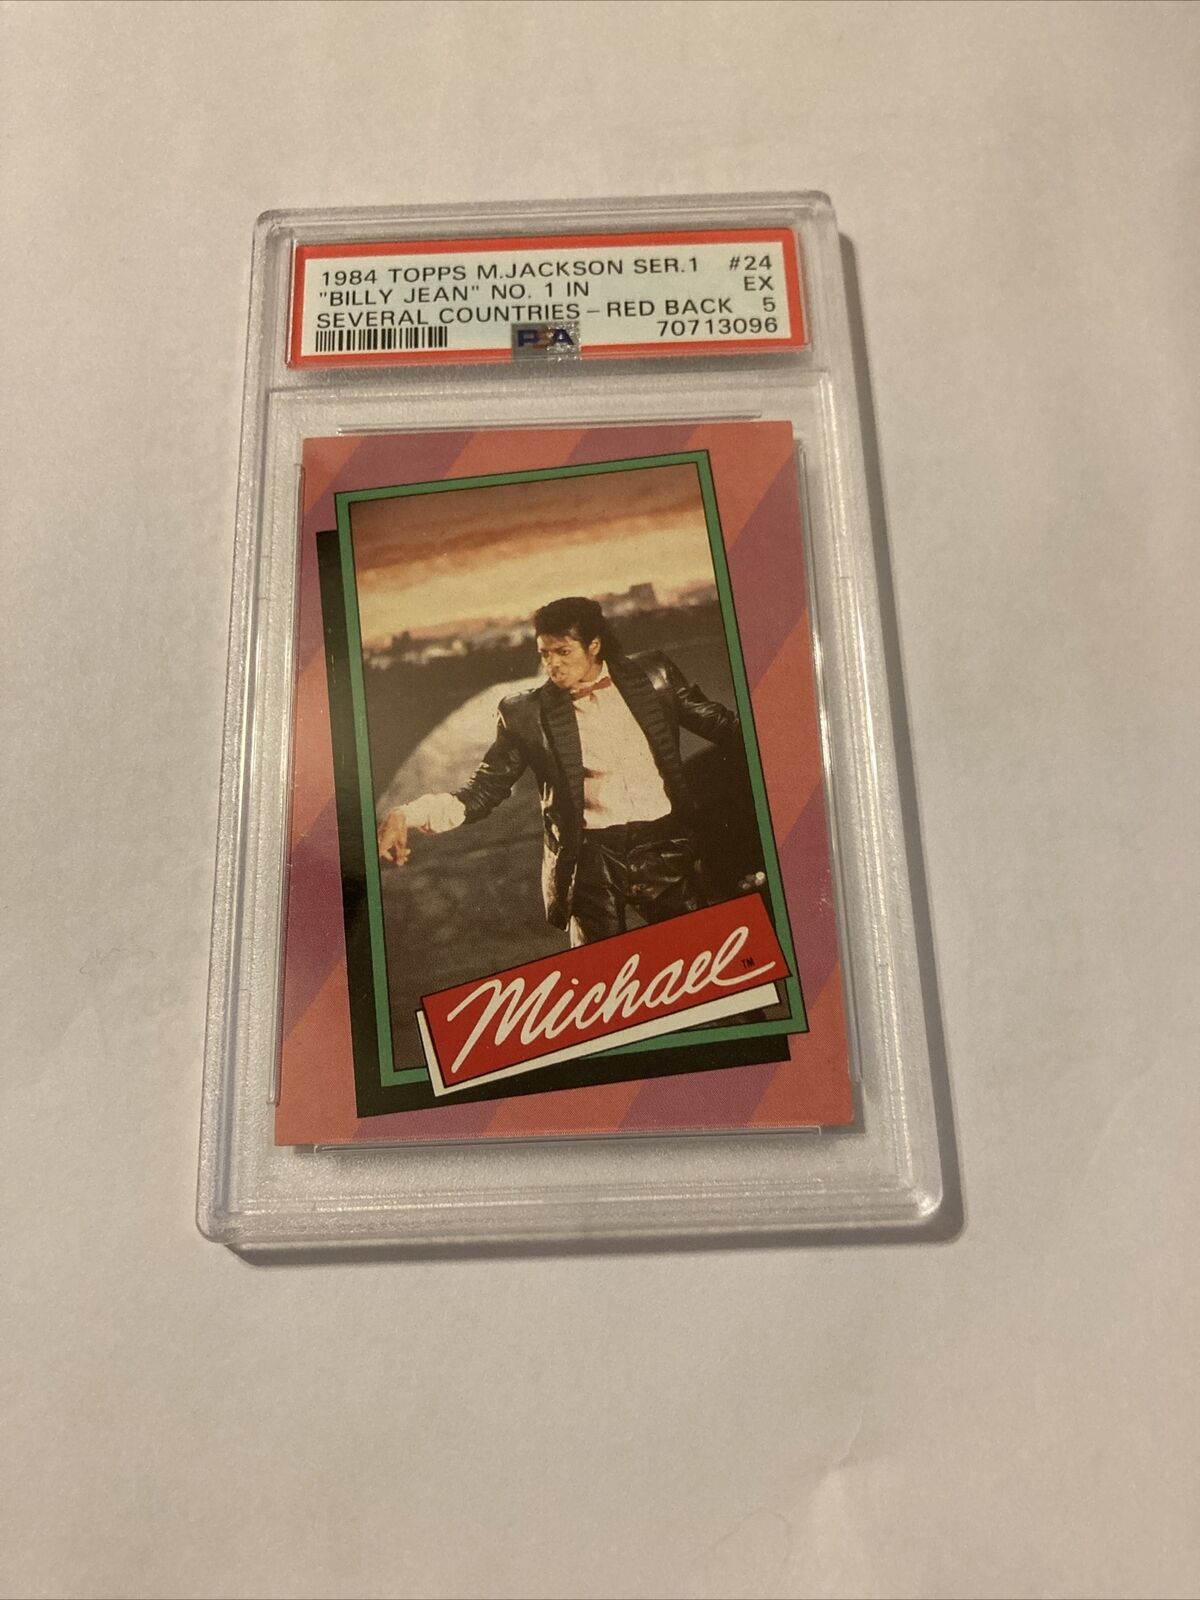 1984 Topps Michael Jackson series 1 “Billy Jean” No 1 in few countries #24 PSA 5